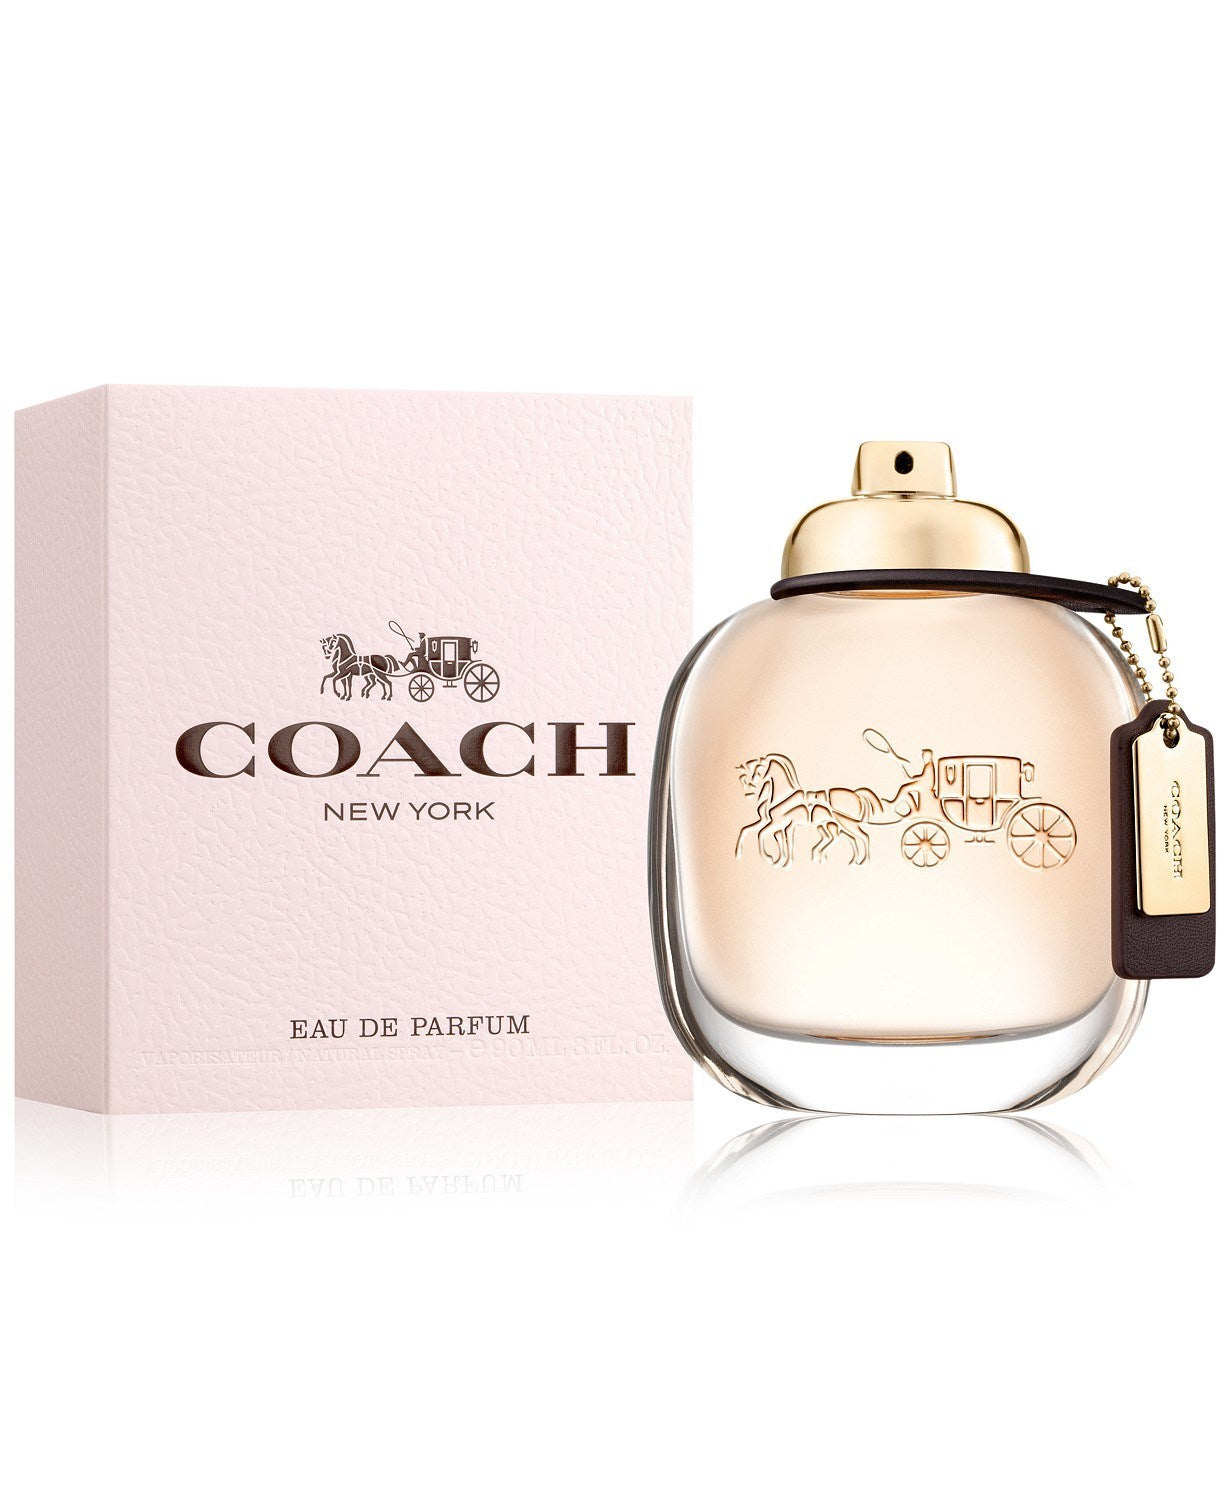 COACH Eau de Parfum by Coach is inspired by the spontaneous energy and downtown style of New York City. A fragrance full of contrasts, opening with bright, sparkling raspberry, giving way to creamy Turkish roses, before drying down to a sensual suede musk base.

The feminine oval bottle references many of Coach's iconic codes. Its spray cap is shaped like a gold turnlock, imitating the signature clasp on Coach bags. Ebony and polished metal hangtags add a distinctive finishing touch. A horse and carriage logo, an enduring symbol of Coach craftsmanship, is subtly engraved into the glass. A nod to femininity, the soft pink packaging features a pebble leather effect as a tribute to the original American leather brand.